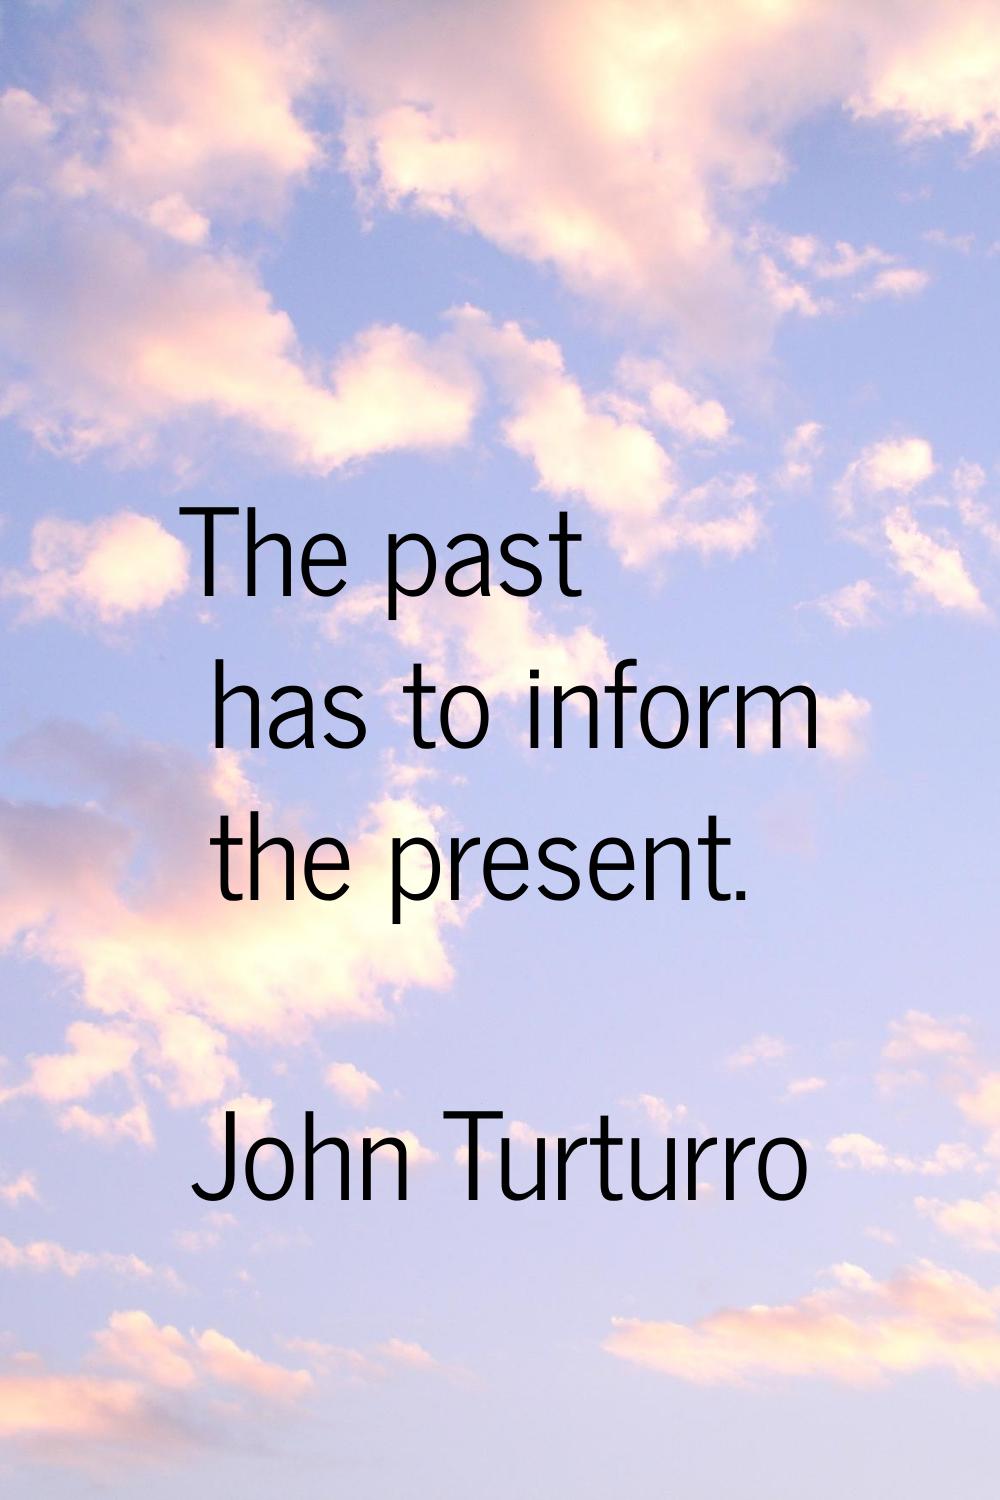 The past has to inform the present.